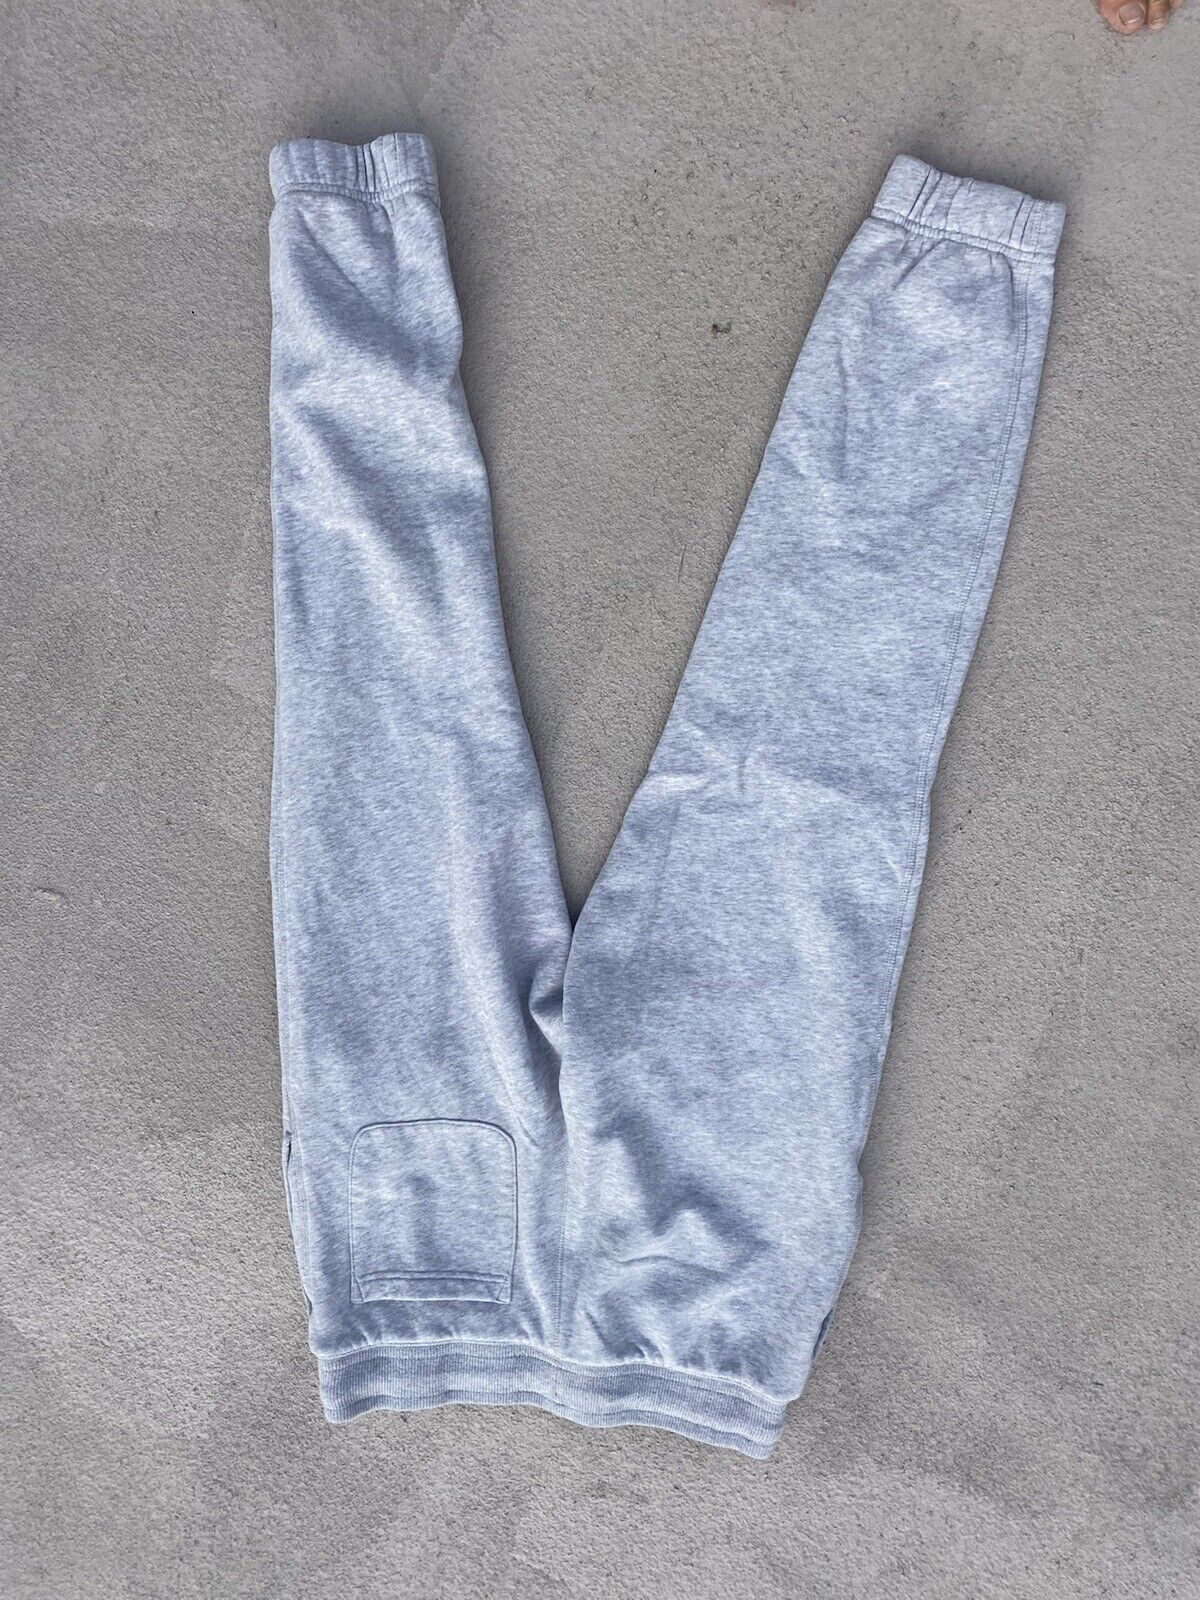 Gray Sweatpants -Unbranded - Adult Small